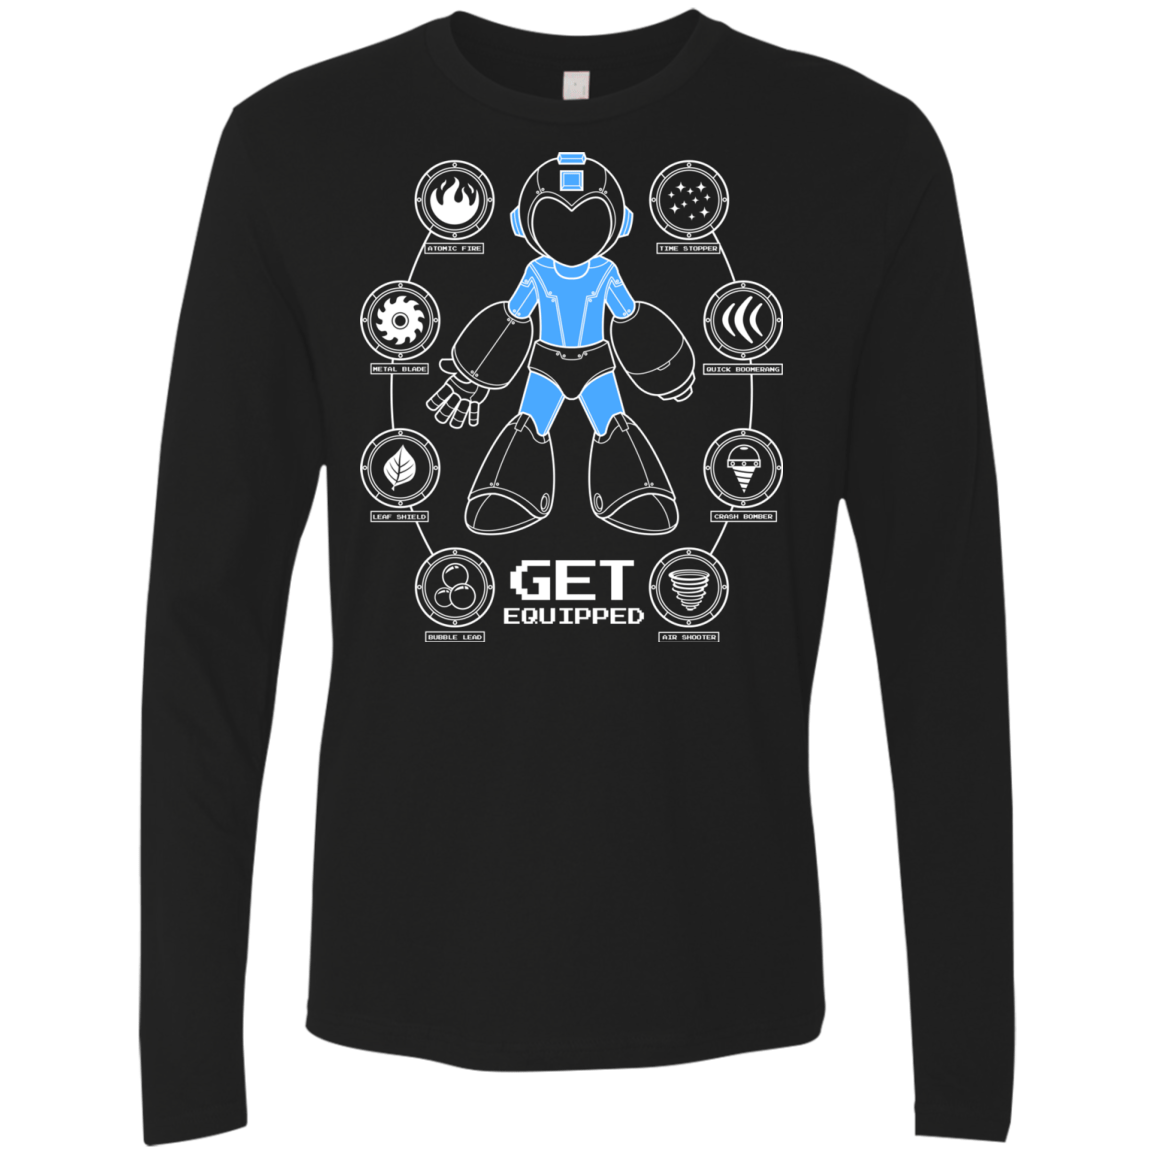 T-Shirts Black / Small Get Equipped Men's Premium Long Sleeve